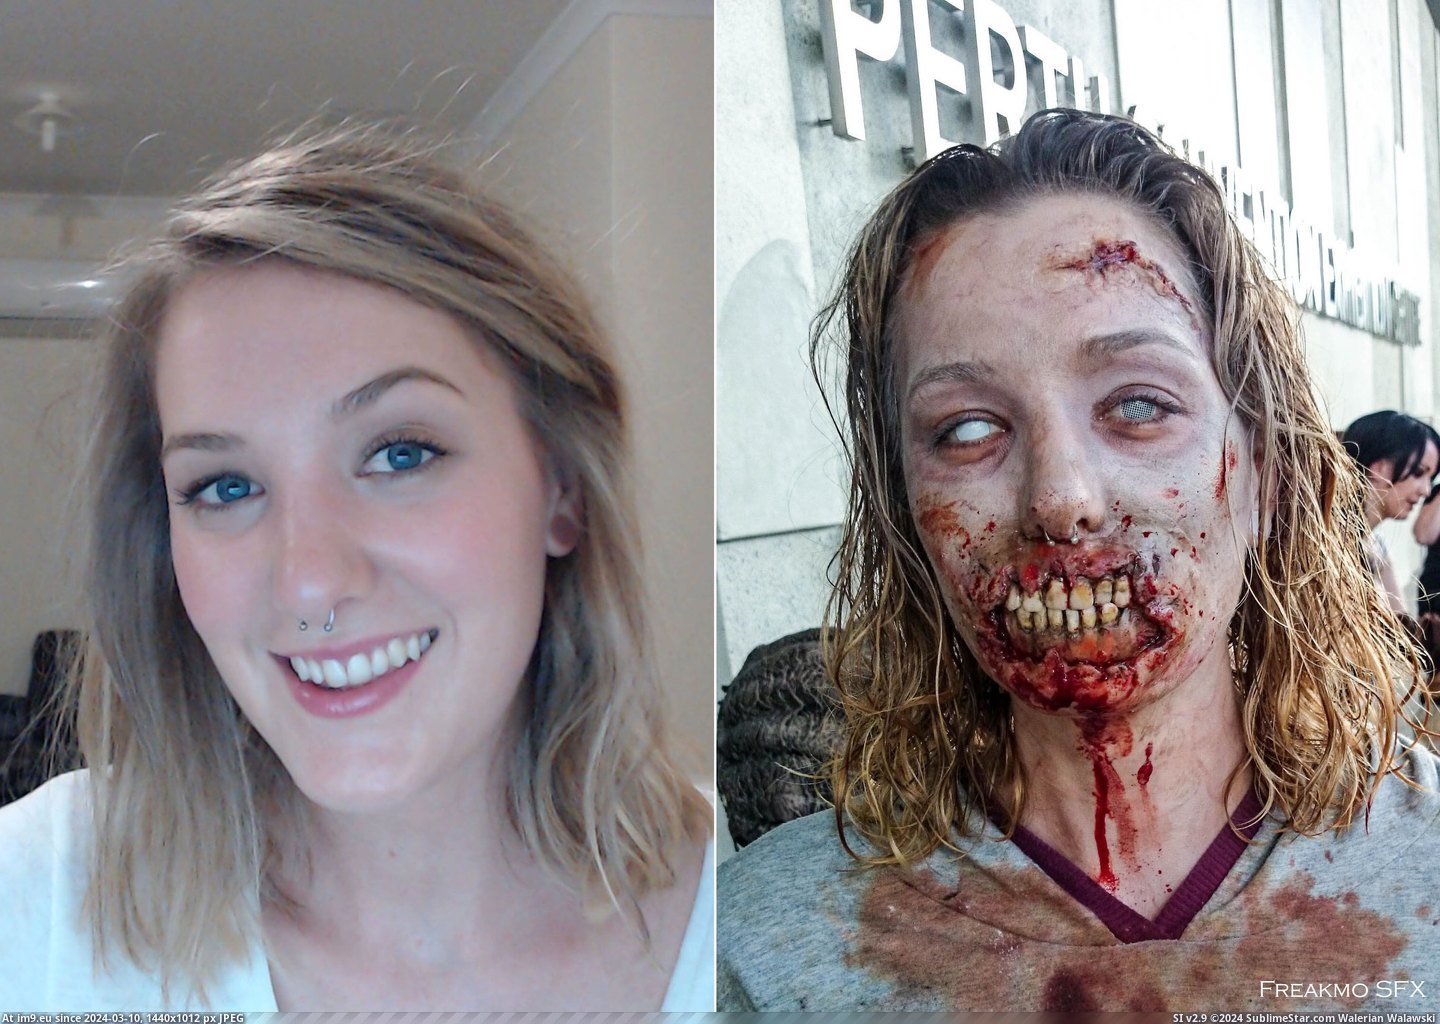 #Weekend #Comic #Zombie #Con #Makeup [Pics] My zombie makeup from Oz Comic-Con this weekend 1 Pic. (Image of album My r/PICS favs))